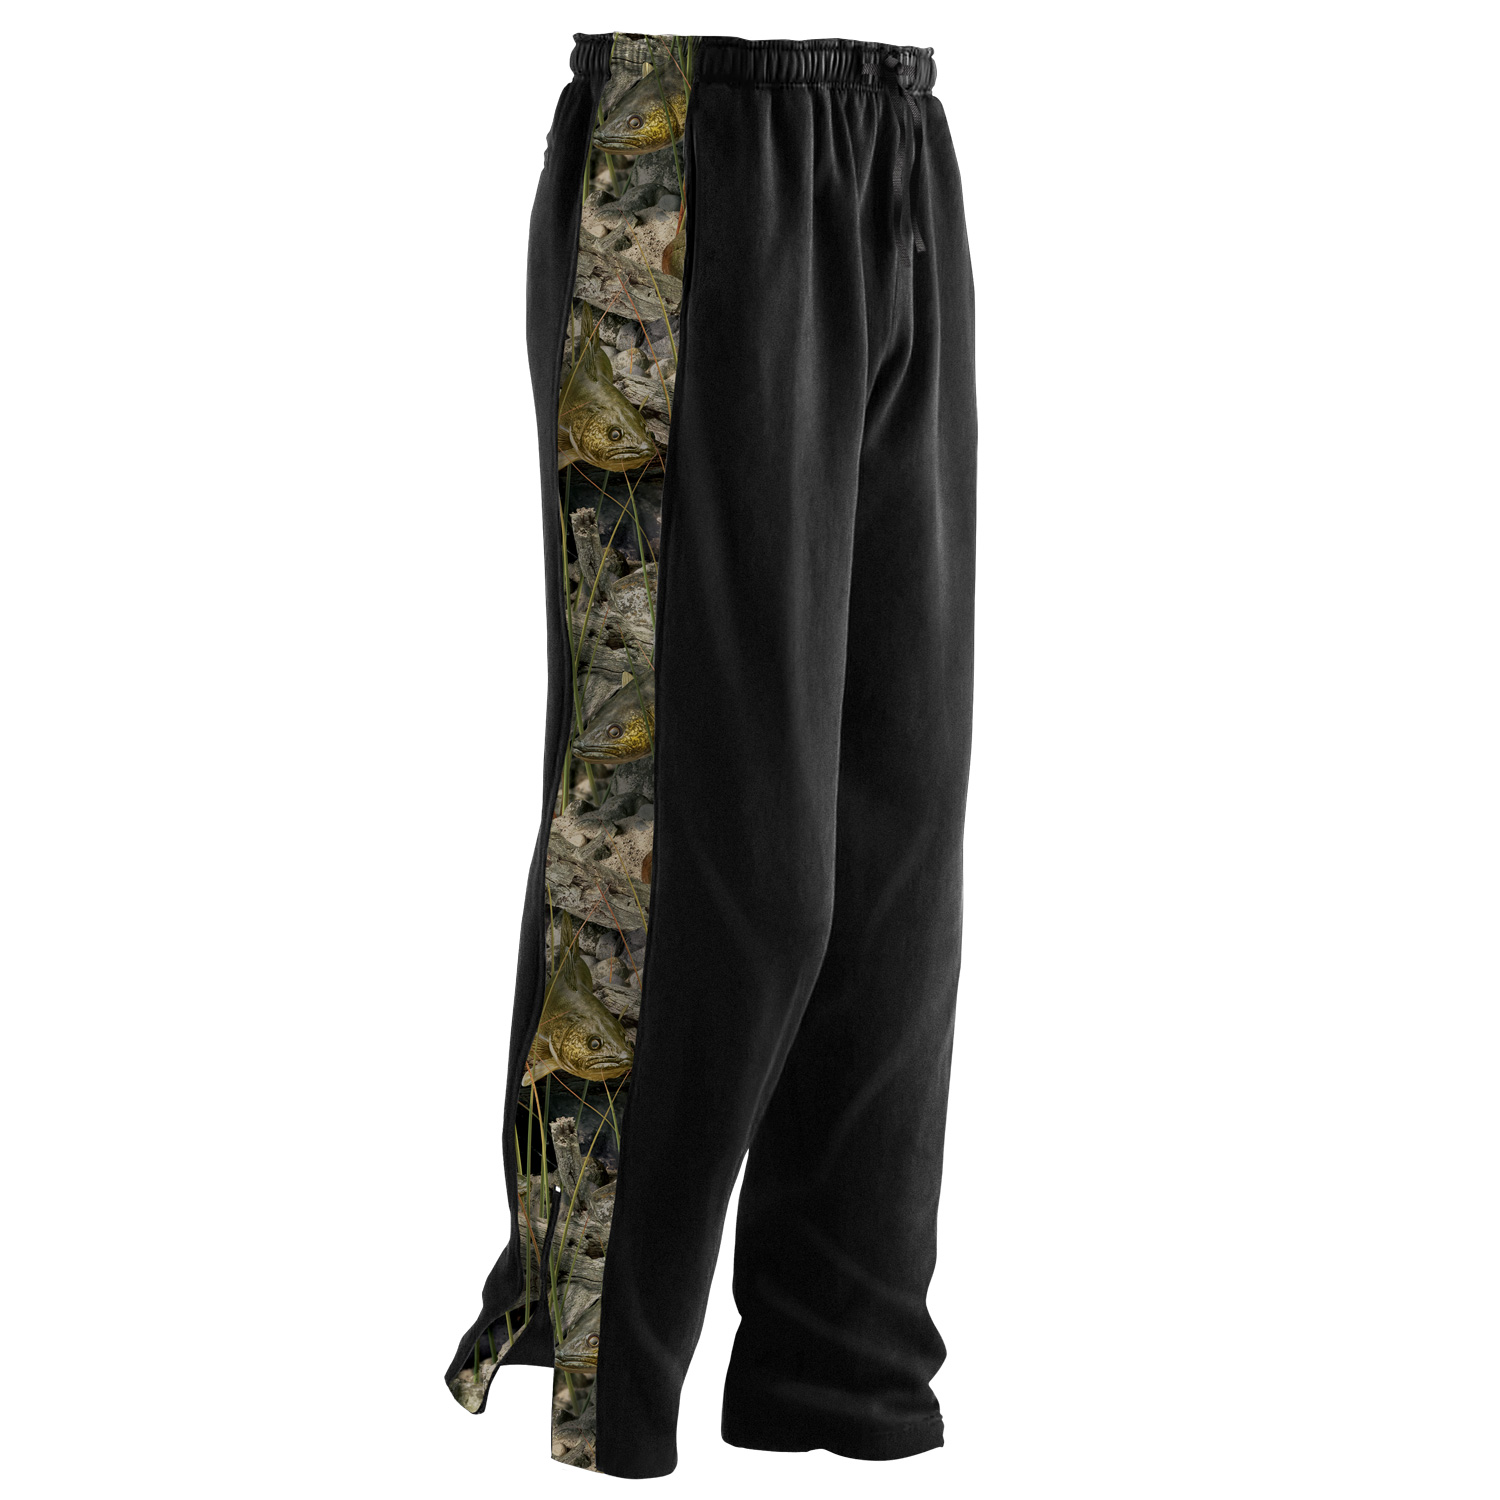 Filthy Anglers Outdoor Fishing Warm Comfortable Sweatpants 